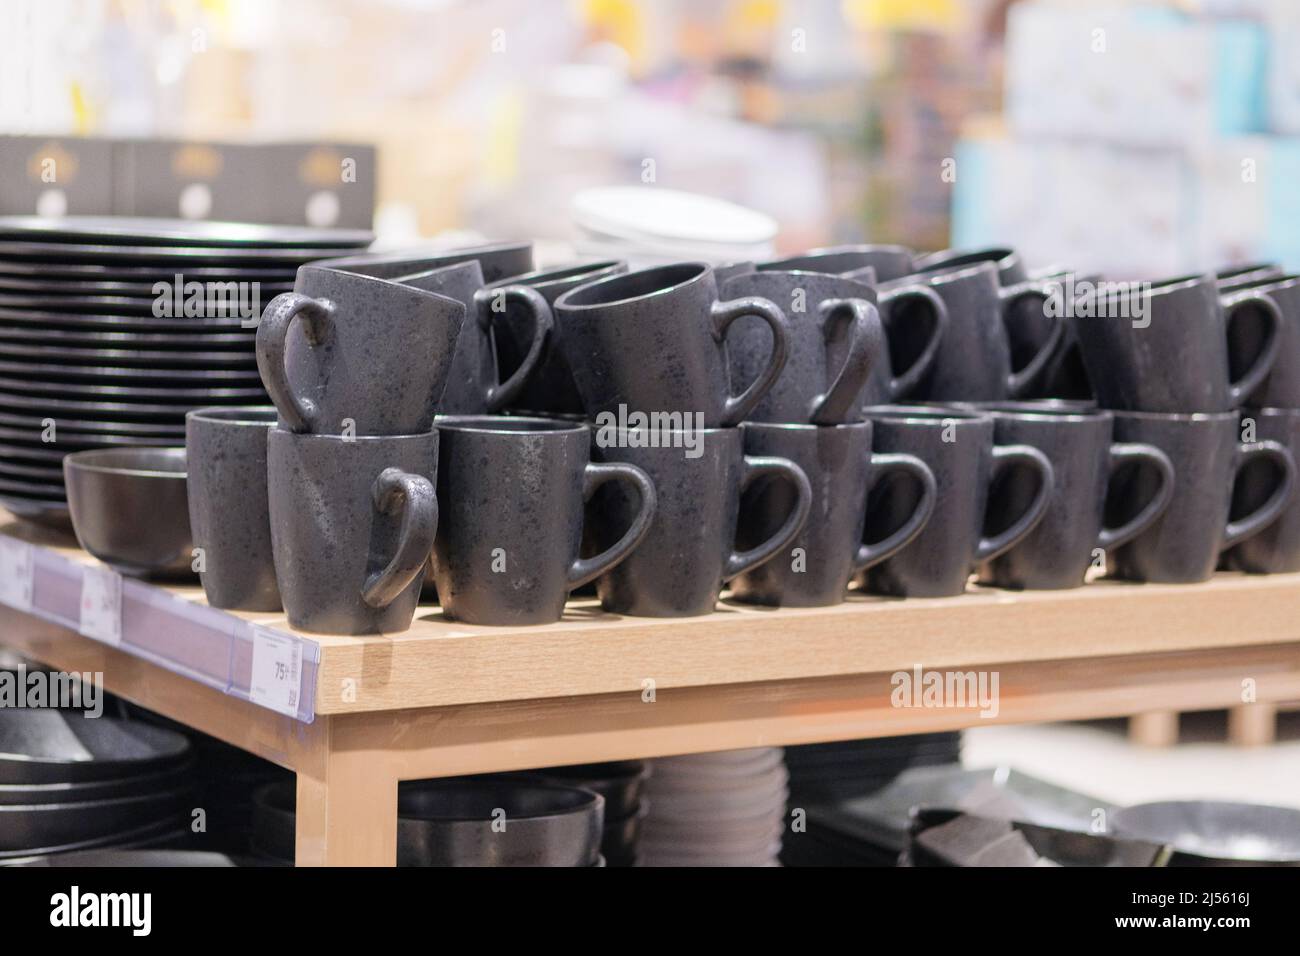 Сups are sold at the store. Rows of different black cups for home on shelves in a supermarket. Stock Photo